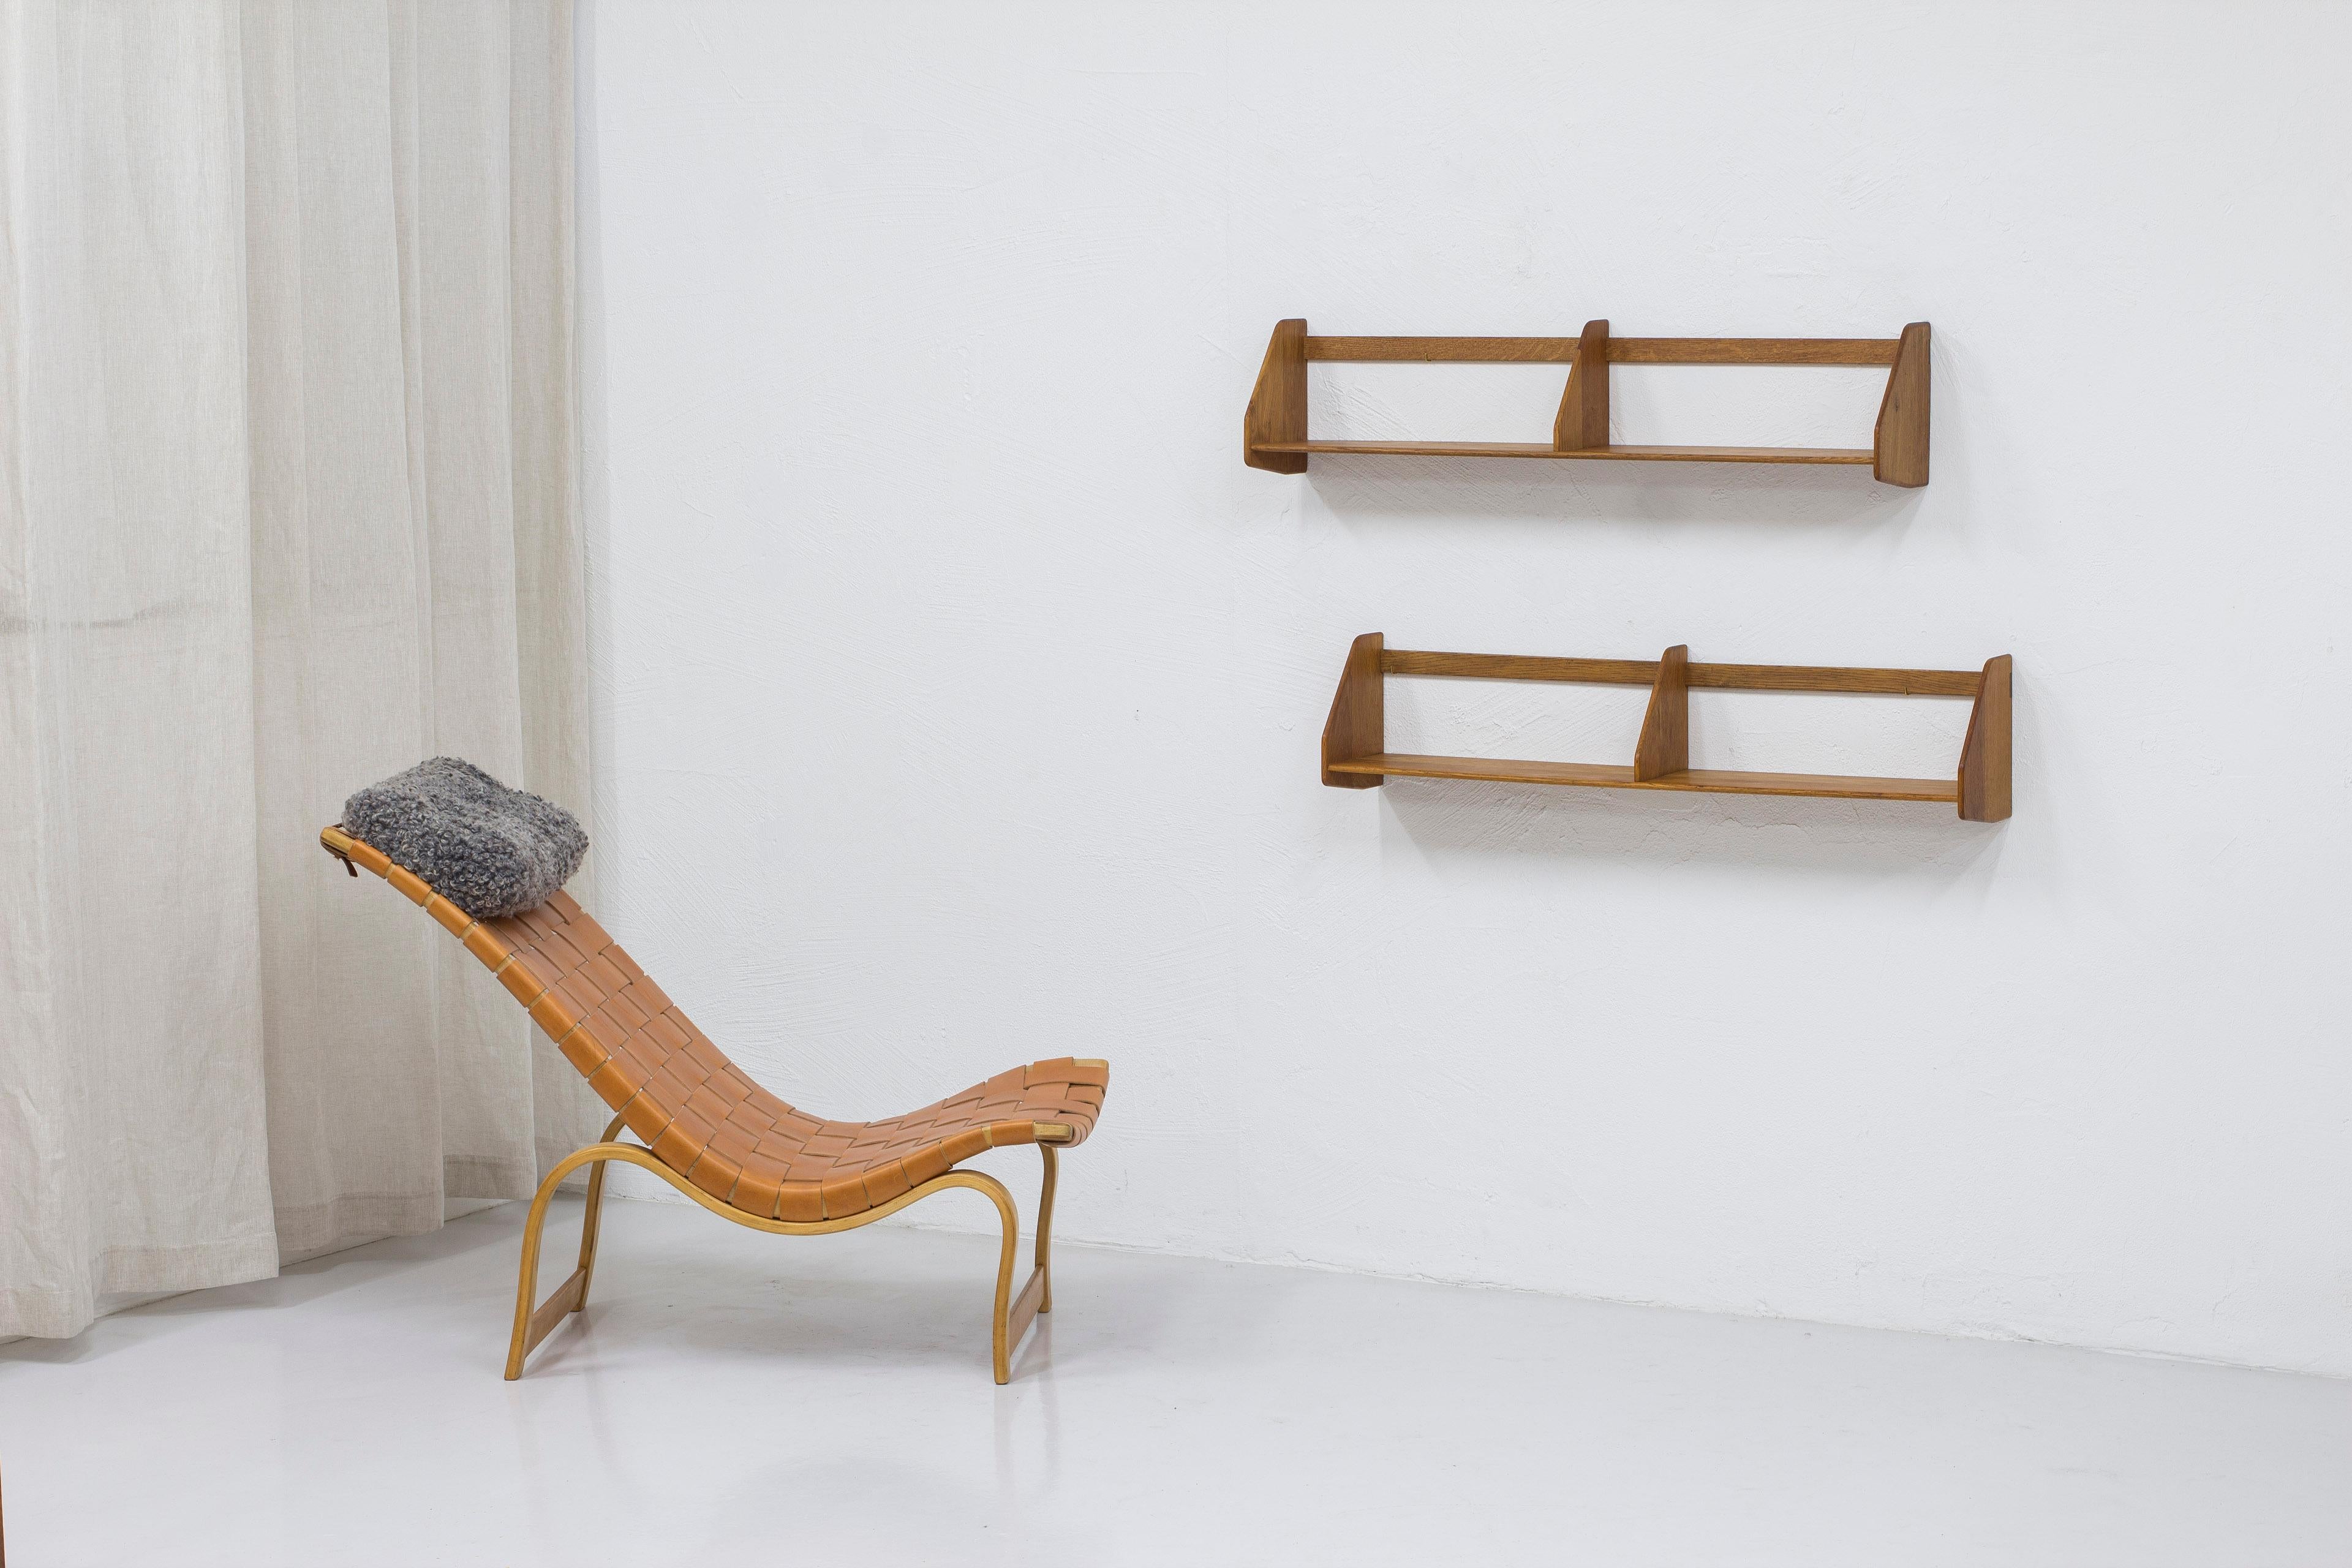 Pair of shelves model RY21 designed by Hans J. Wegner. Produced in Denmark by RY Møbler during the 1950s. Made from solid oiled oak. The back pieces have not been screwed through which is very common. Instead the shelf is hung on small brass hooks.